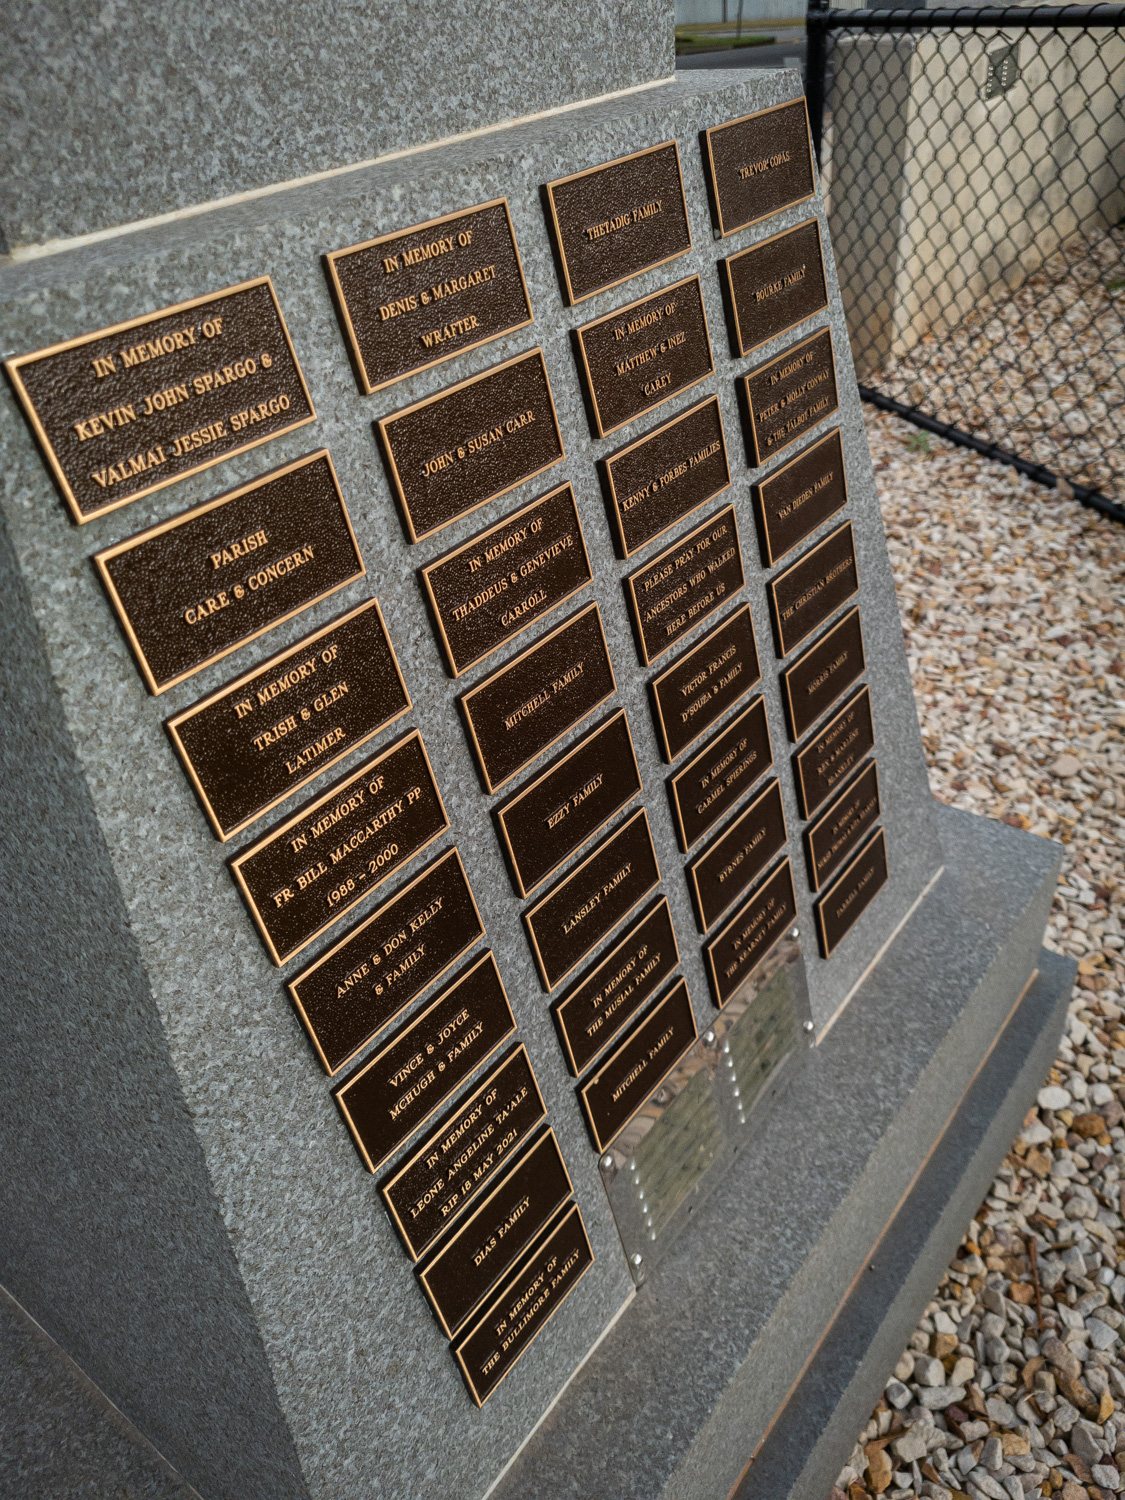 Bronze plaques on granite diestone with names of families who donated funds.